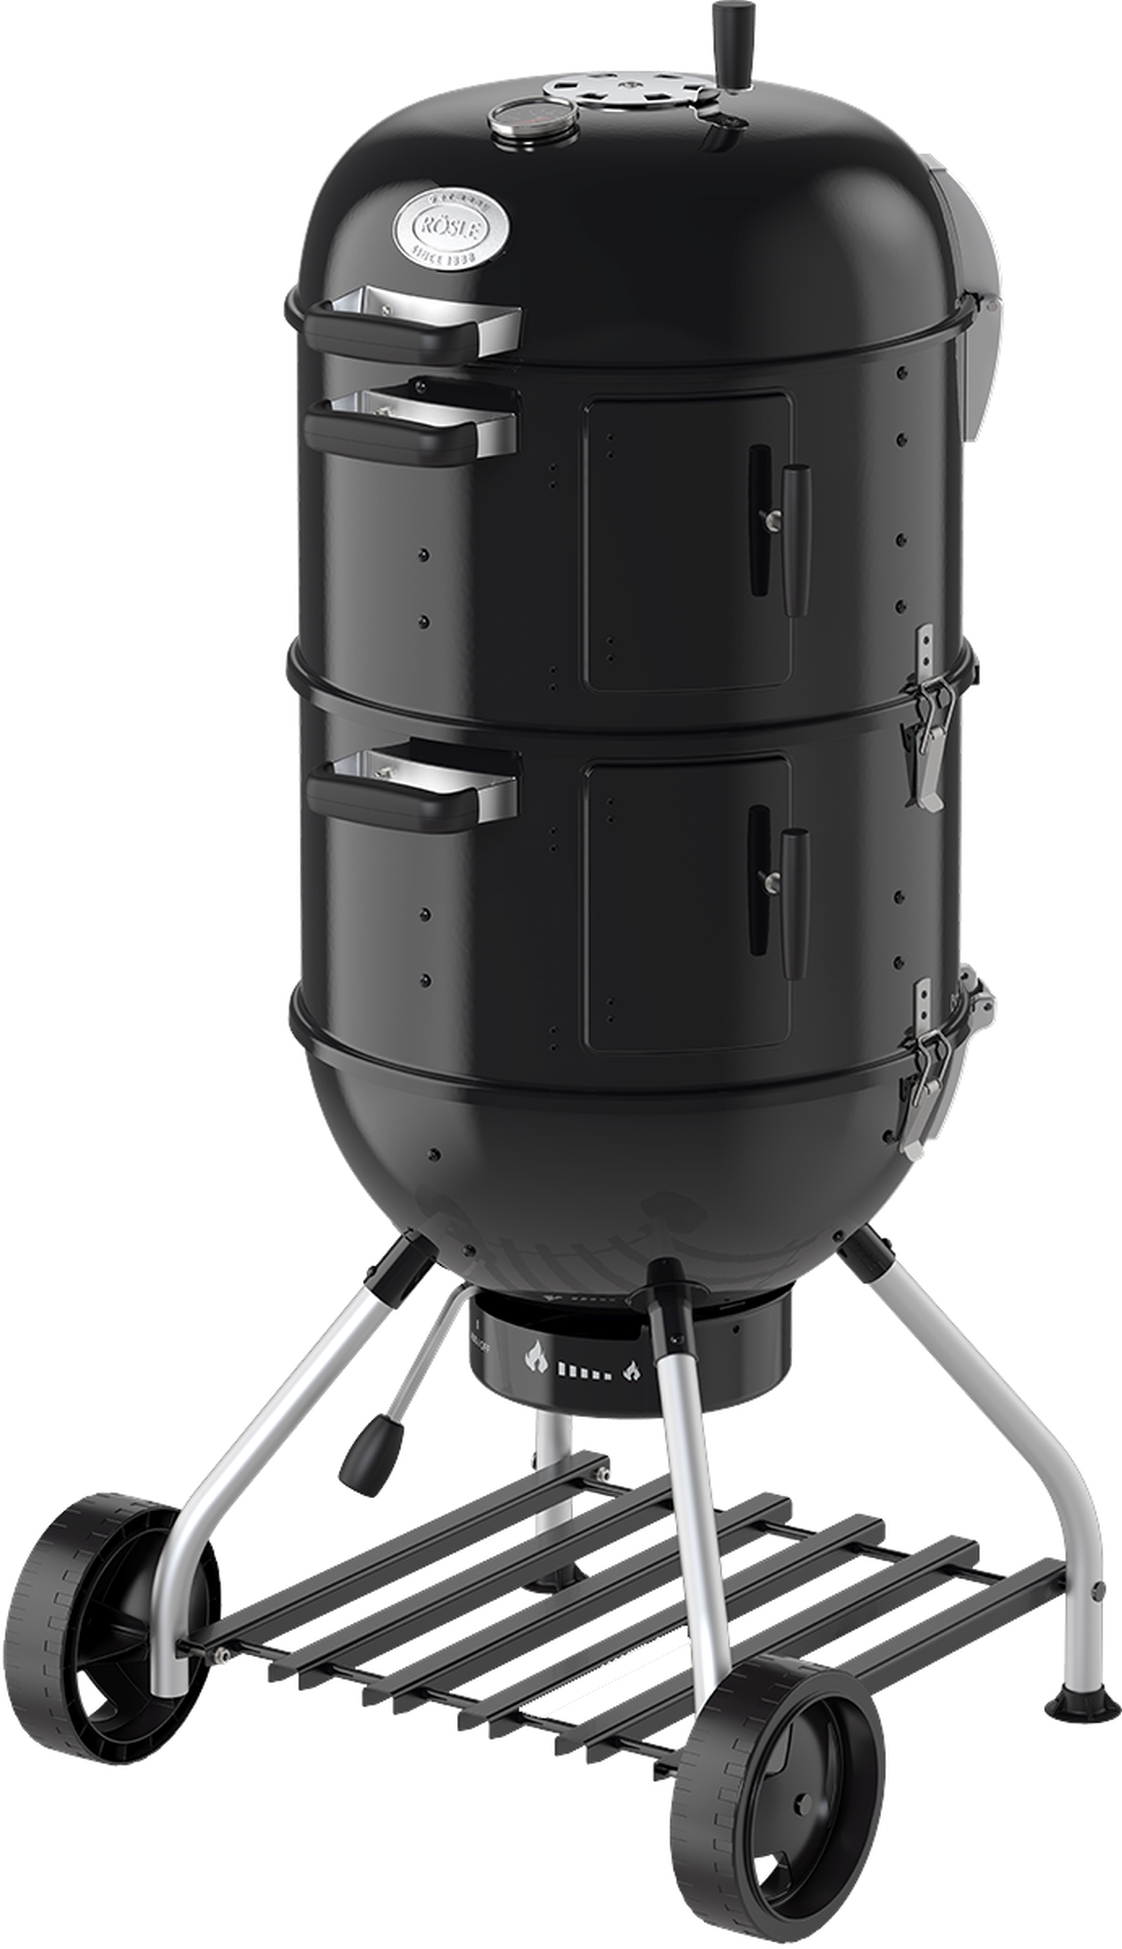 Rosle Charcoal Smoker No.1 F50-S convertible, Multi Grill, Barbecue, Smoker, Tailgater, camping, steamer - image 1 of 9